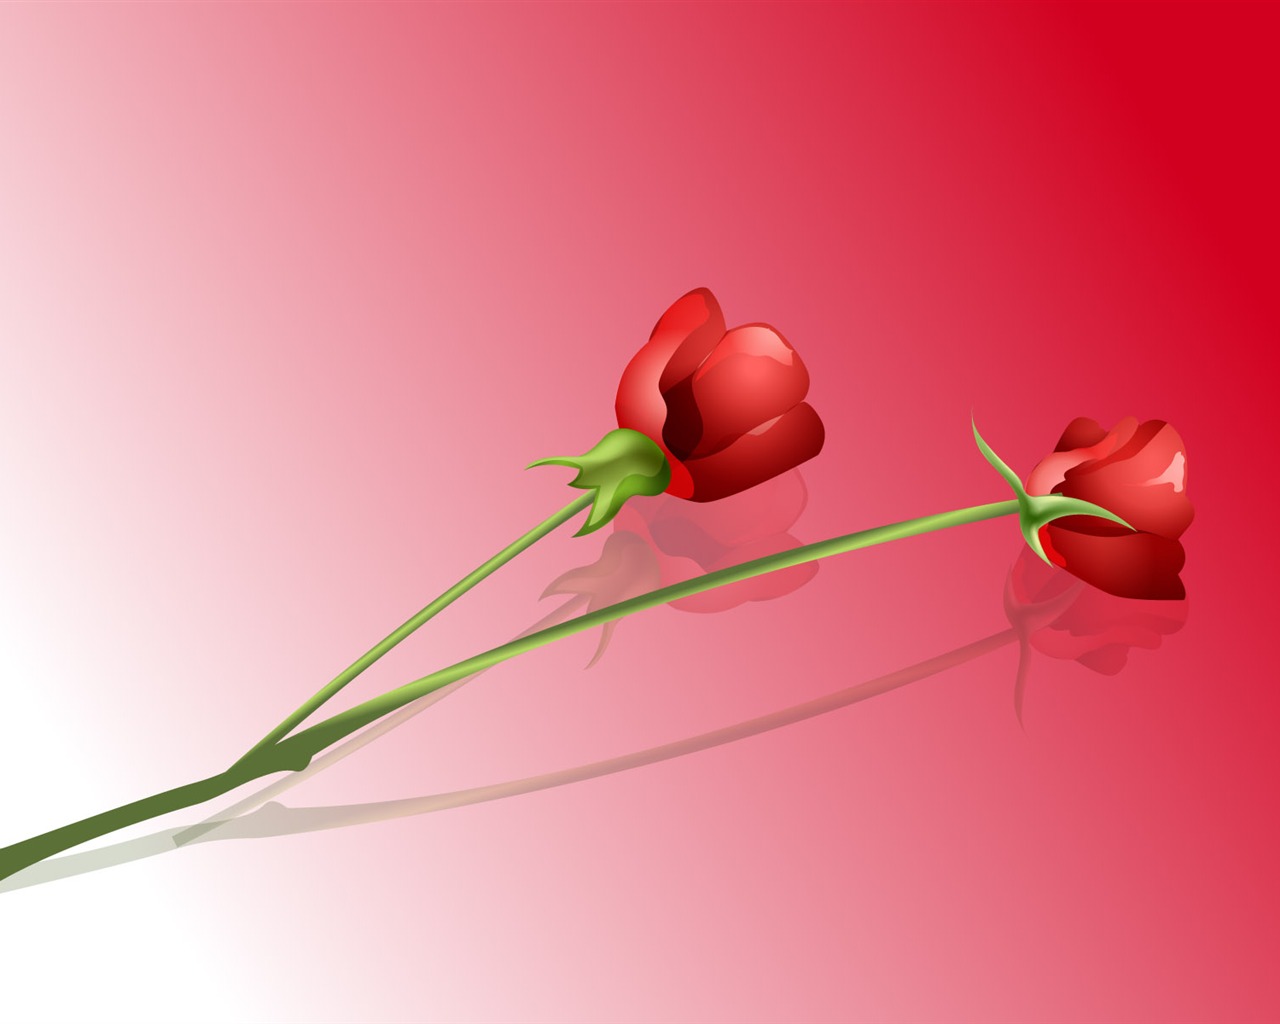 Valentine's Day Love Theme Wallpapers (3) #12 - 1280x1024